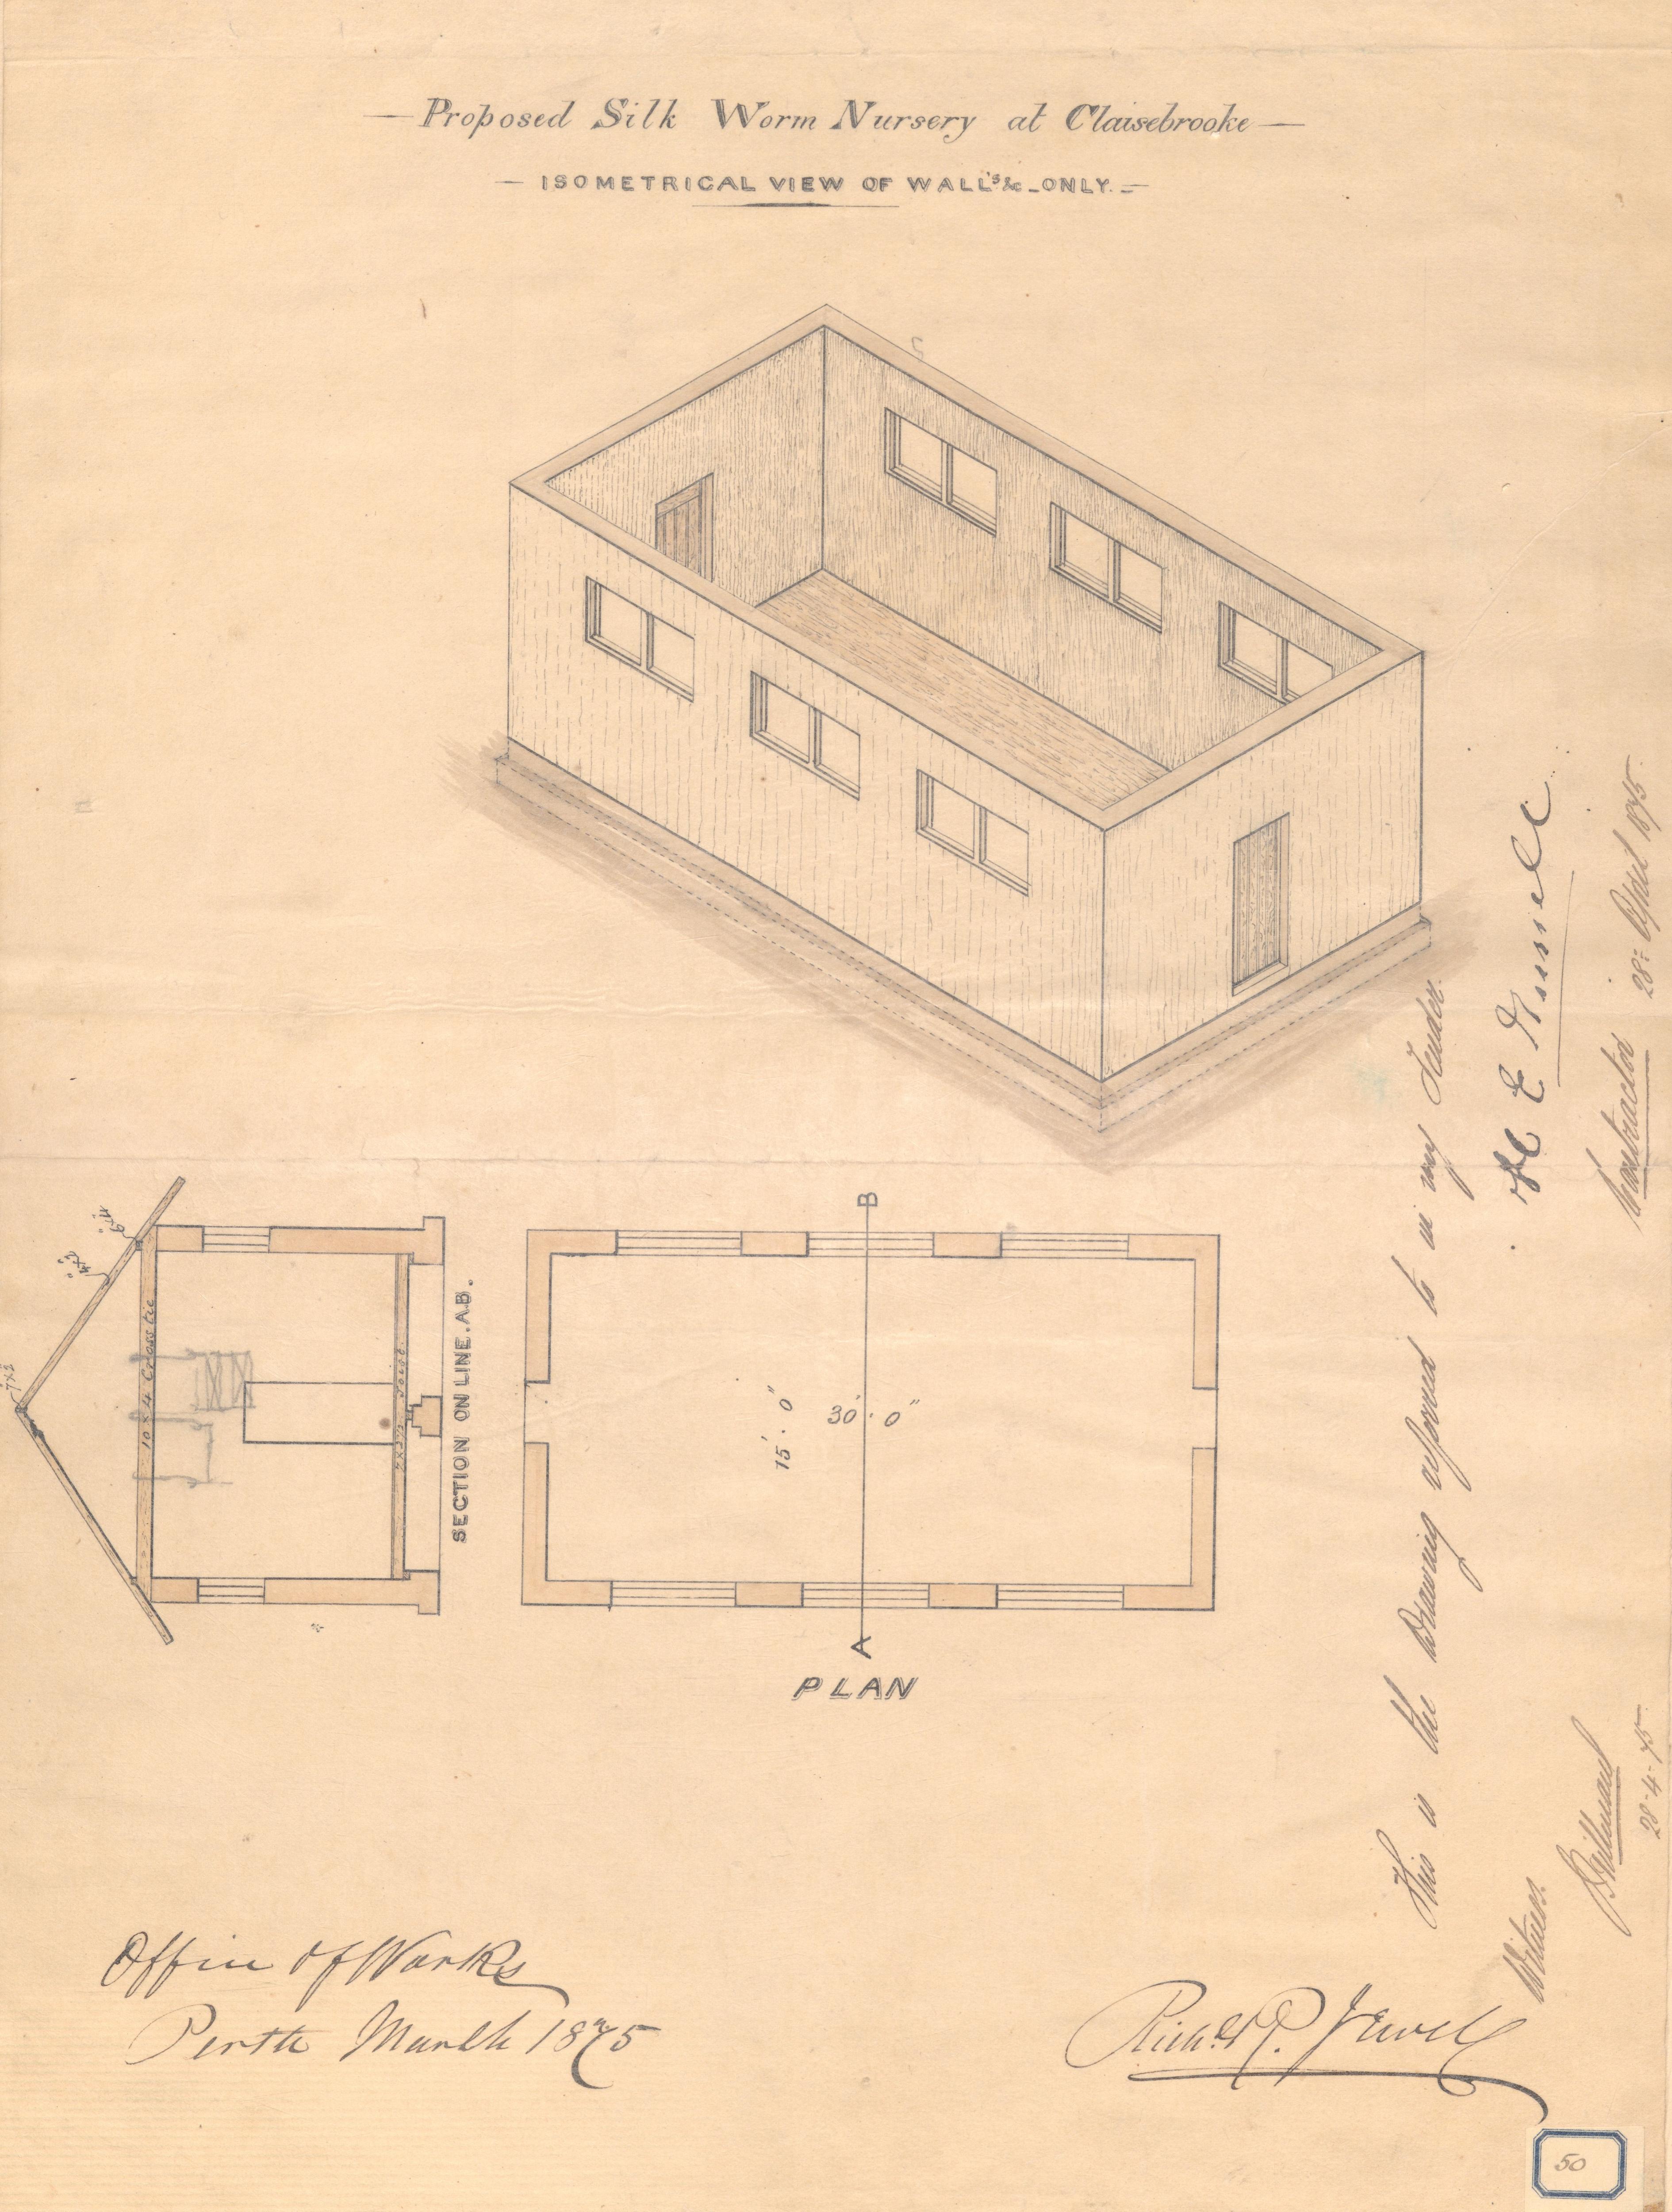 An architectural sketch of a proposed silkworm nursery in Claisebrook 1875. 